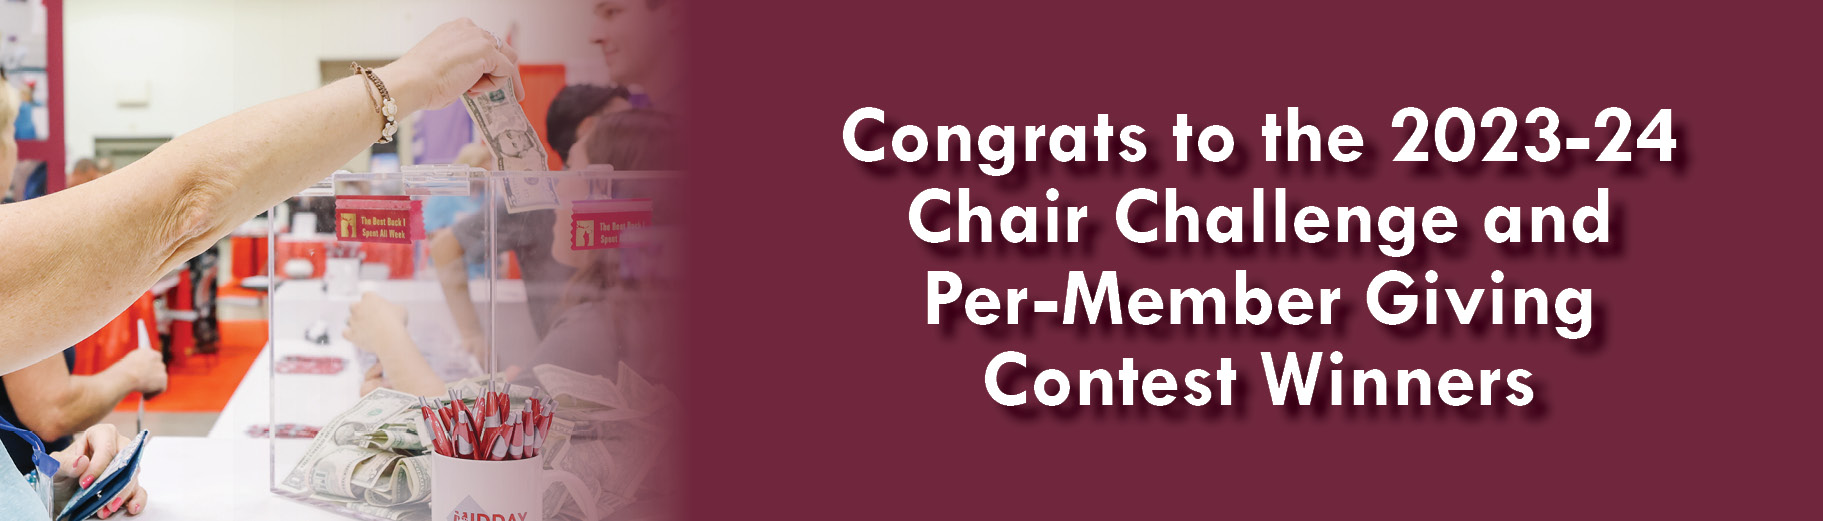 2023-24 Per-Member Giving and Chair Challenge Winners